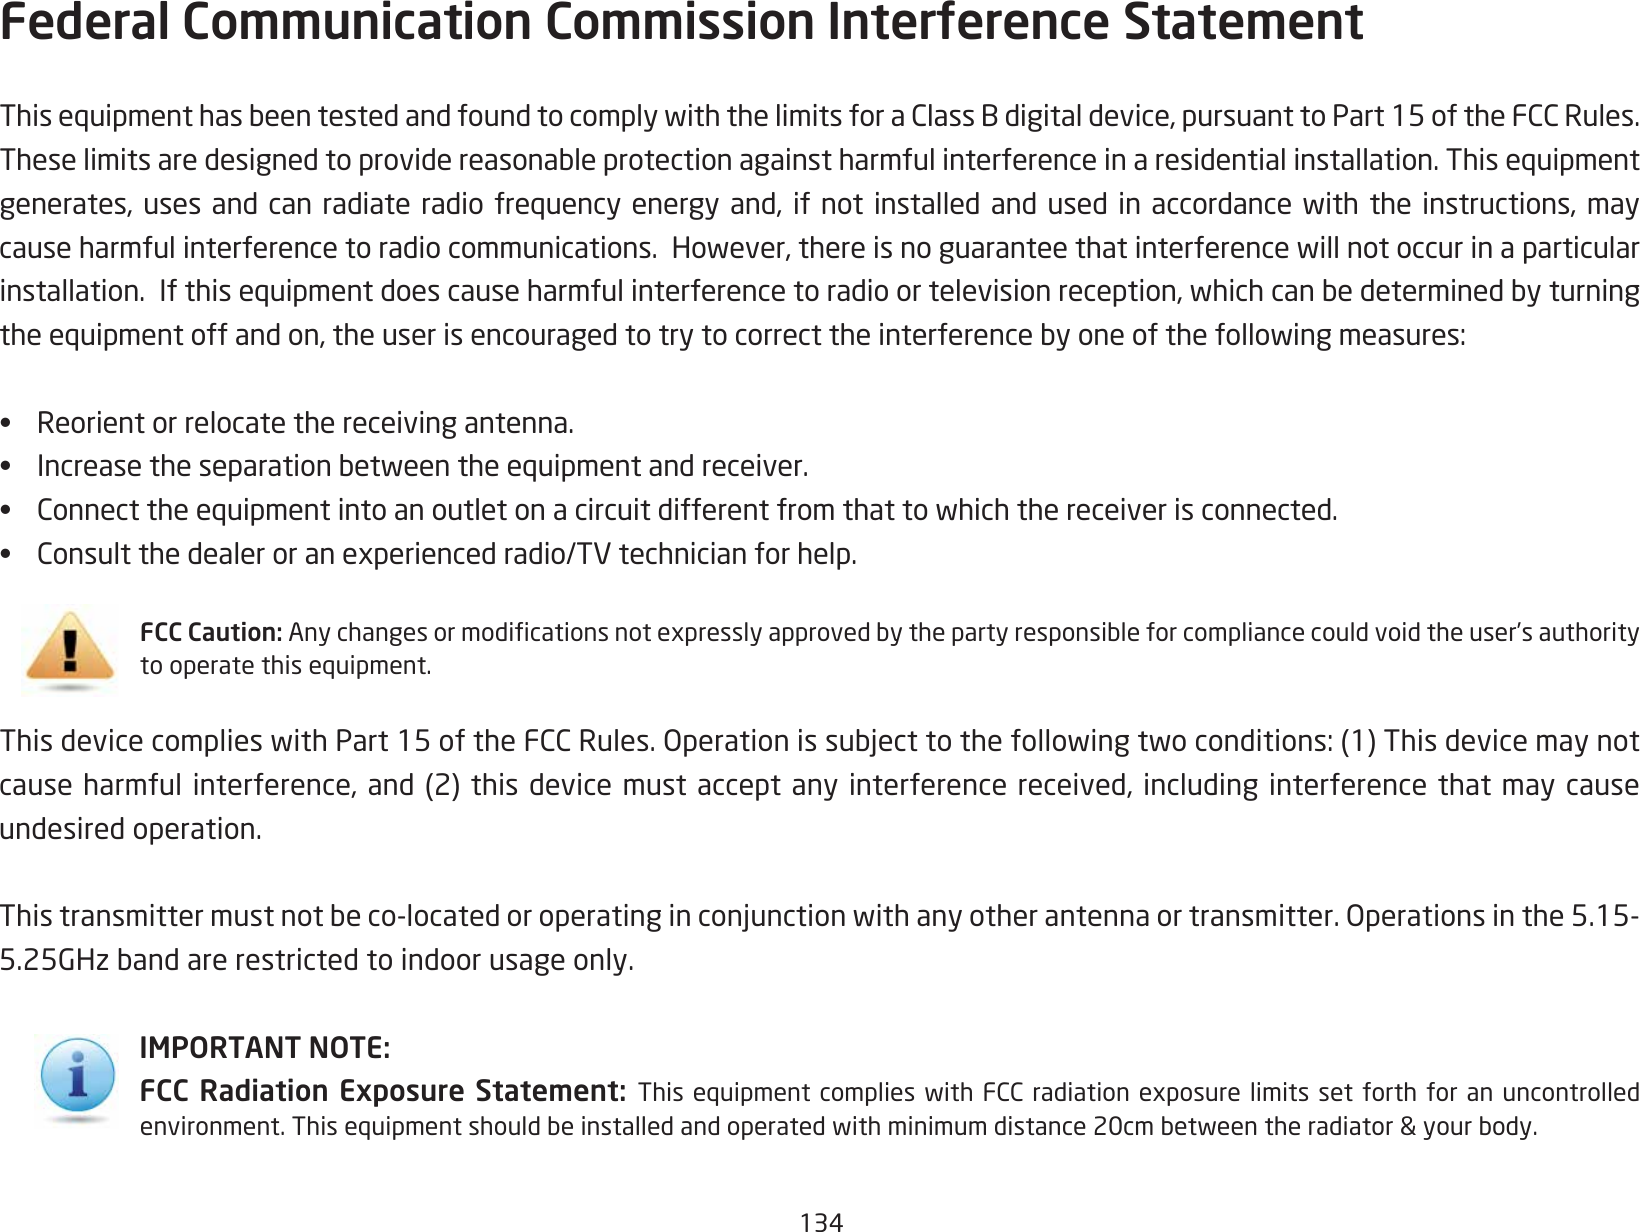 134Federal Communication Commission Interference Statement ThisequipmenthasbeentestedandfoundtocomplywiththelimitsforaClassBdigitaldevice,pursuanttoPart15oftheFCCRules.Theselimitsaredesignedtoprovidereasonableprotectionagainstharmfulinterferenceinaresidentialinstallation.Thisequipmentgenerates,uses andcan radiateradio frequencyenergy and,if notinstalled andused inaccordance withthe instructions,maycauseharmfulinterferencetoradiocommunications.However,thereisnoguaranteethatinterferencewillnotoccurinaparticularinstallation.Ifthisequipmentdoescauseharmfulinterferencetoradioortelevisionreception,whichcanbedeterminedbyturningtheequipmentoffandon,theuserisencouragedtotrytocorrecttheinterferencebyoneofthefollowingmeasures:•  Reorient or relocate the receiving antenna.•  Increasetheseparationbetweentheequipmentandreceiver.•  Connecttheequipmentintoanoutletonacircuitdifferentfromthattowhichthereceiverisconnected.•  Consultthedealeroranexperiencedradio/TVtechnicianforhelp.FCC Caution: Anychangesormodicationsnotexpresslyapprovedbythepartyresponsibleforcompliancecouldvoidtheuser’sauthoritytooperatethisequipment.ThisdevicecomplieswithPart15oftheFCCRules.Operationissubjecttothefollowingtwoconditions:(1)Thisdevicemaynotcauseharmfulinterference,and(2)thisdevicemustacceptanyinterferencereceived,includinginterferencethatmaycauseundesired operation.Thistransmittermustnotbeco-locatedoroperatinginconjunctionwithanyotherantennaortransmitter.Operationsinthe5.15-5.25GHzbandarerestrictedtoindoorusageonly.IMPORTANT NOTE:FCC Radiation Exposure Statement:  Thisequipmentcomplieswith FCCradiation exposurelimits setforth foran uncontrolledenvironment.Thisequipmentshouldbeinstalledandoperatedwithminimumdistance20cmbetweentheradiator&amp;yourbody.